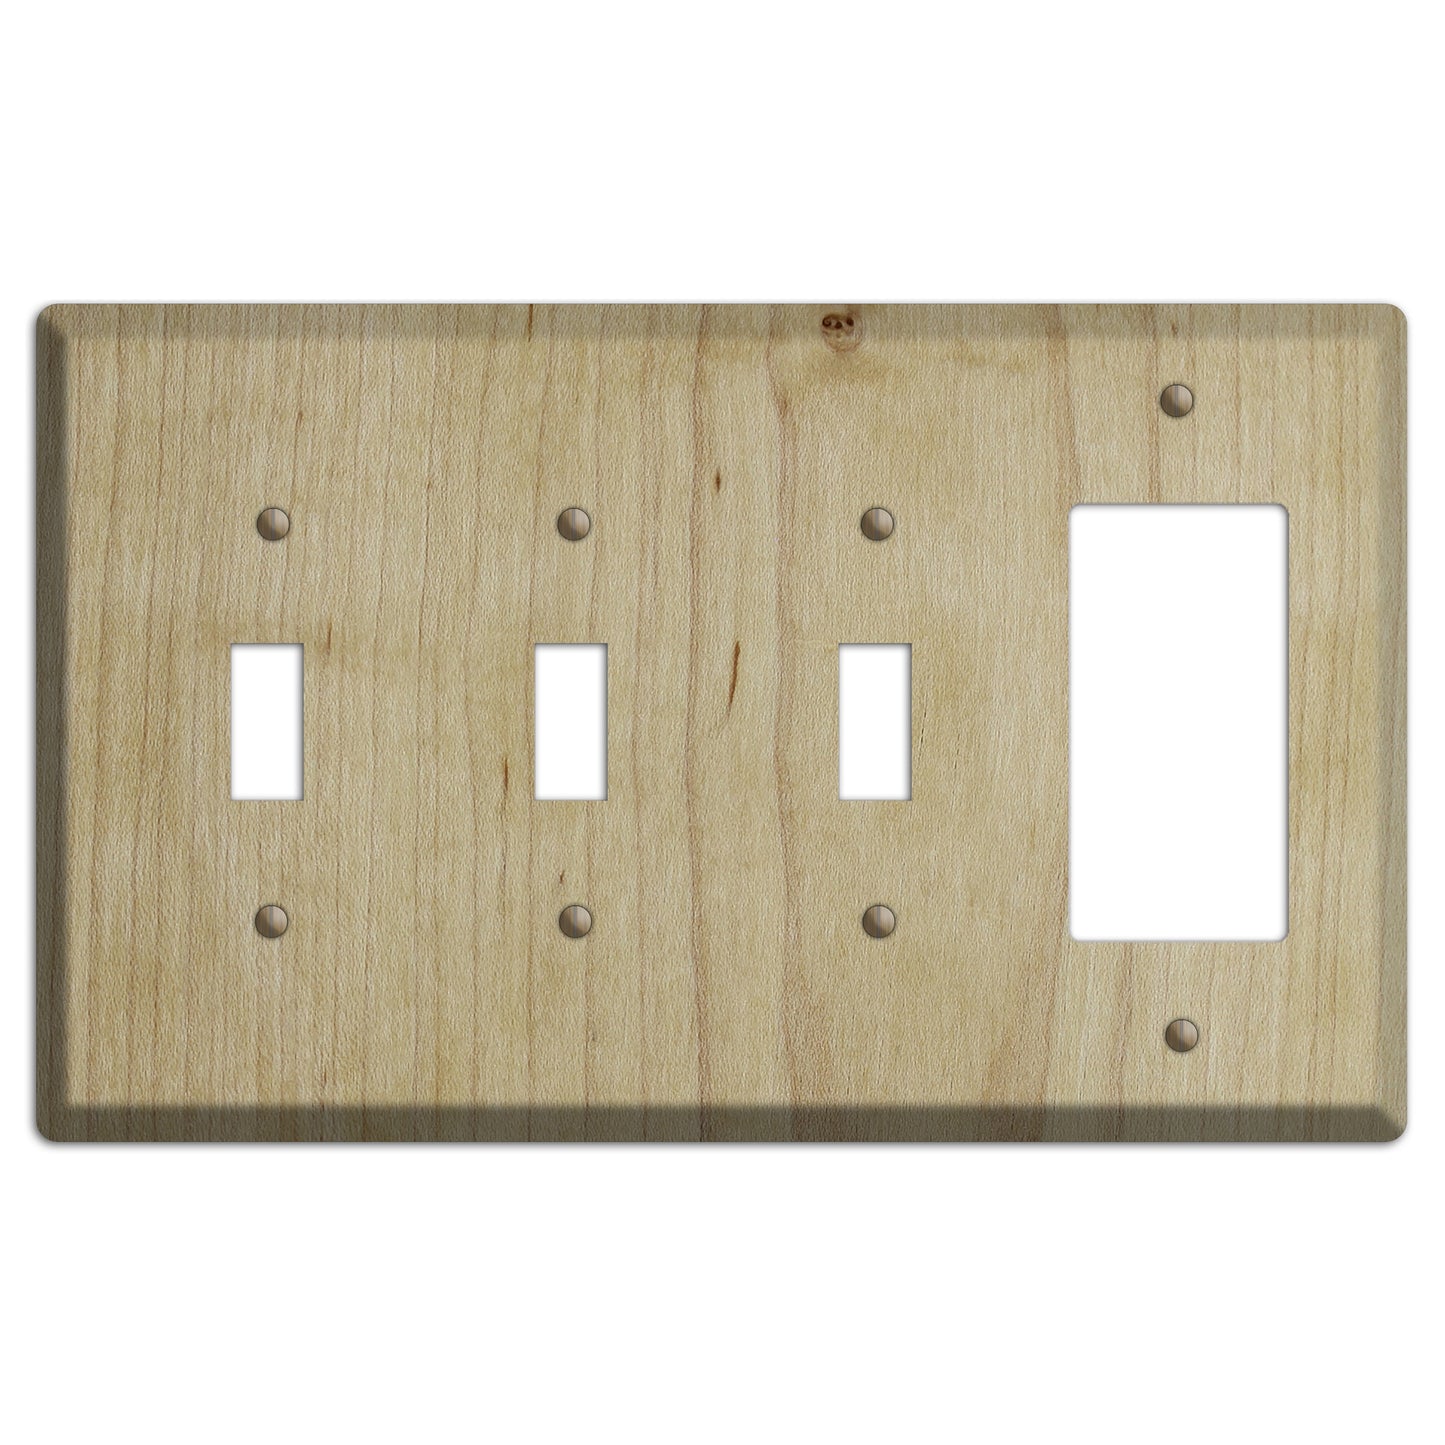 Maple Wood 3 Toggle / Rocker Outlet Cover Plate